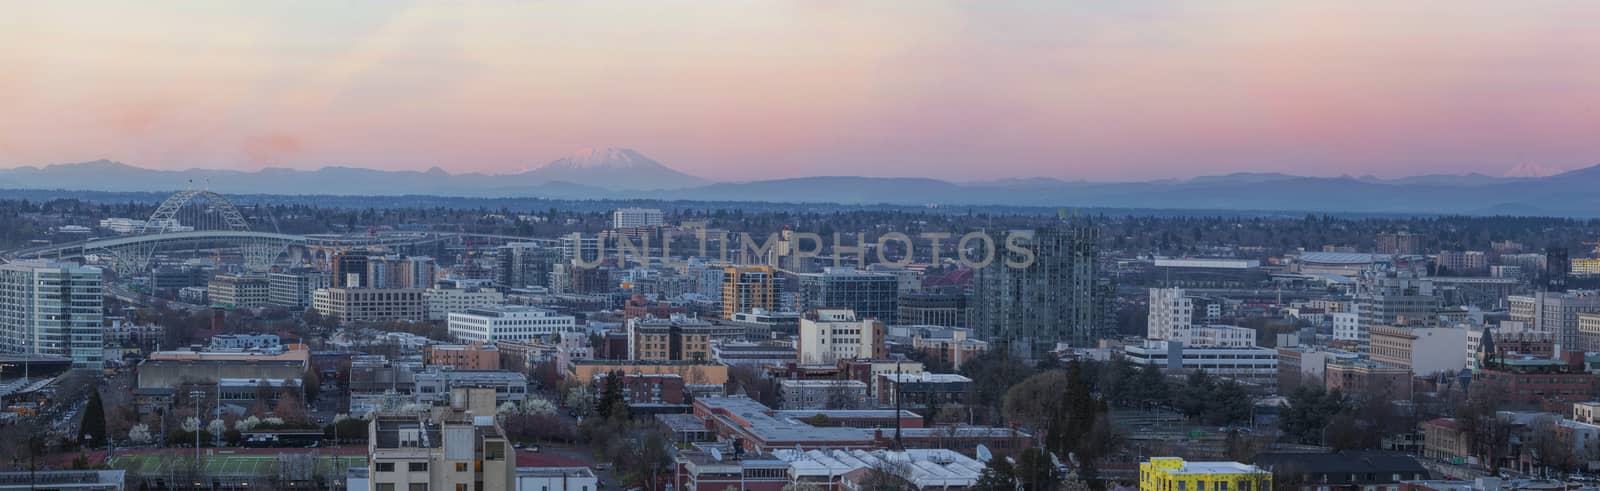 View of Portland Pearl District Cityscape at Sunset by jpldesigns